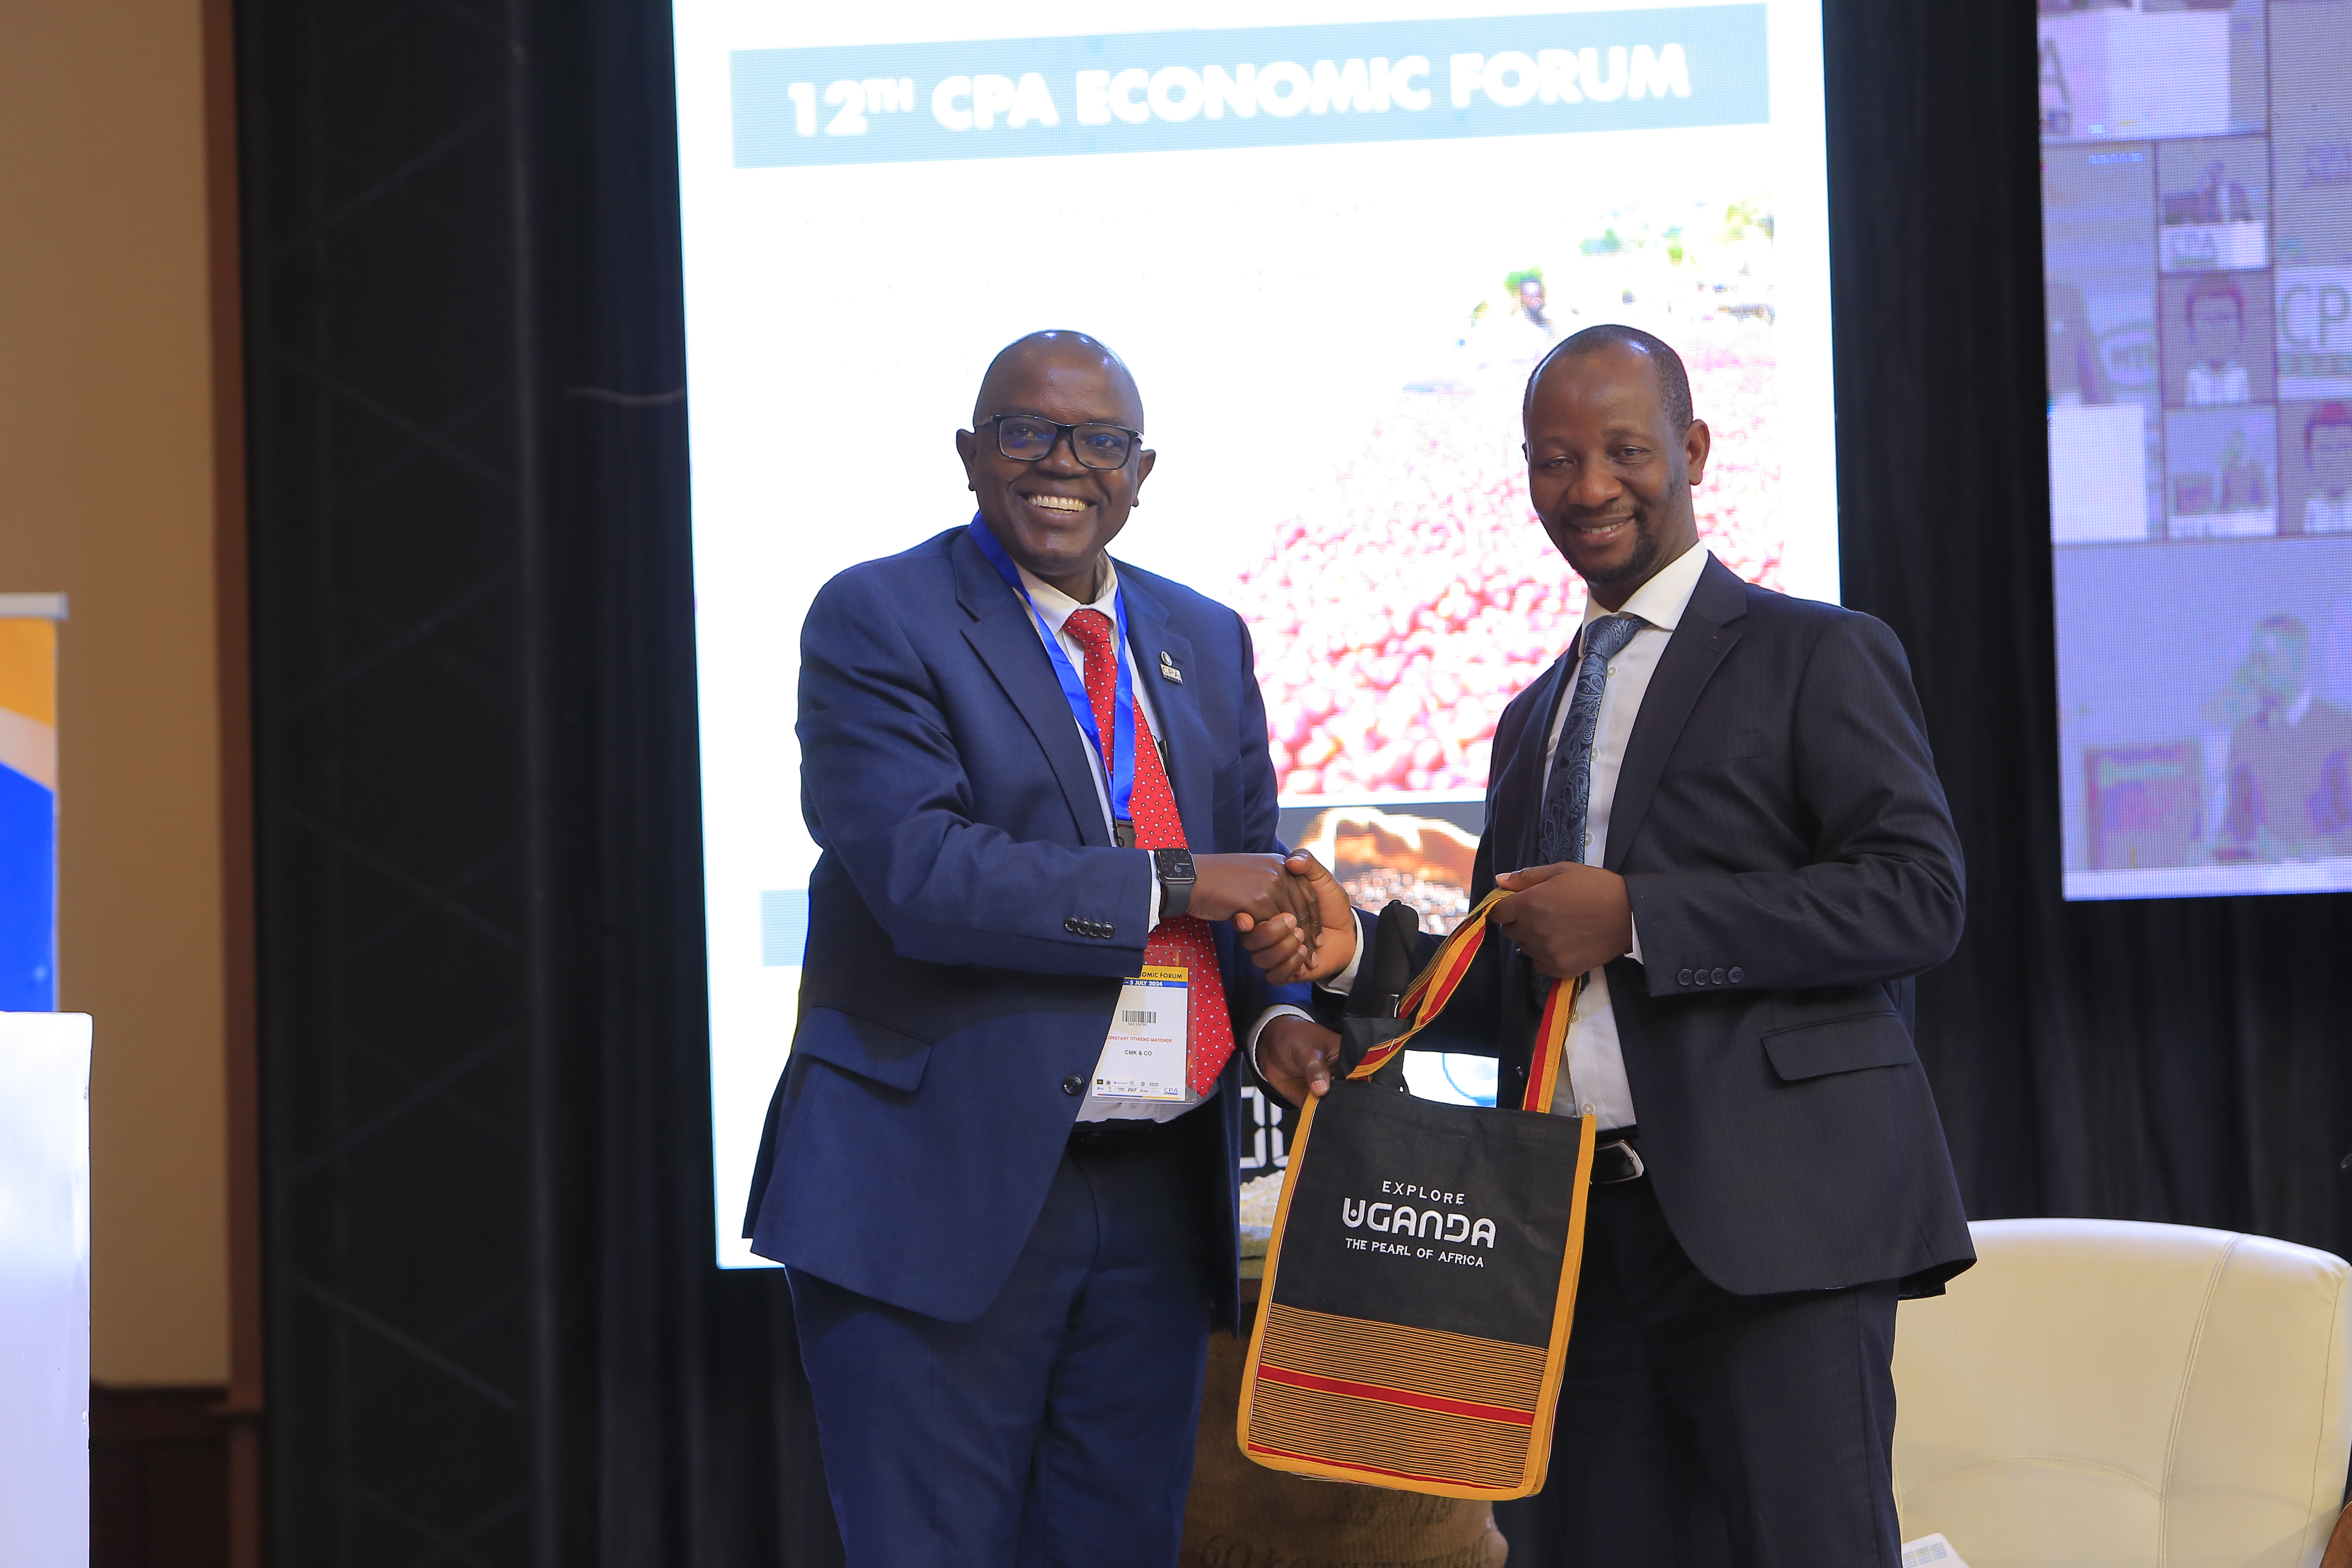 Hon. Ibrahim Ssemujju Nganda, Member of Parliament of Uganda for Kira Municipality(L), receiving a token of appreciation from ICPAU’s former President CPA Constant Mayende (R) at the 12th Economic Forum.